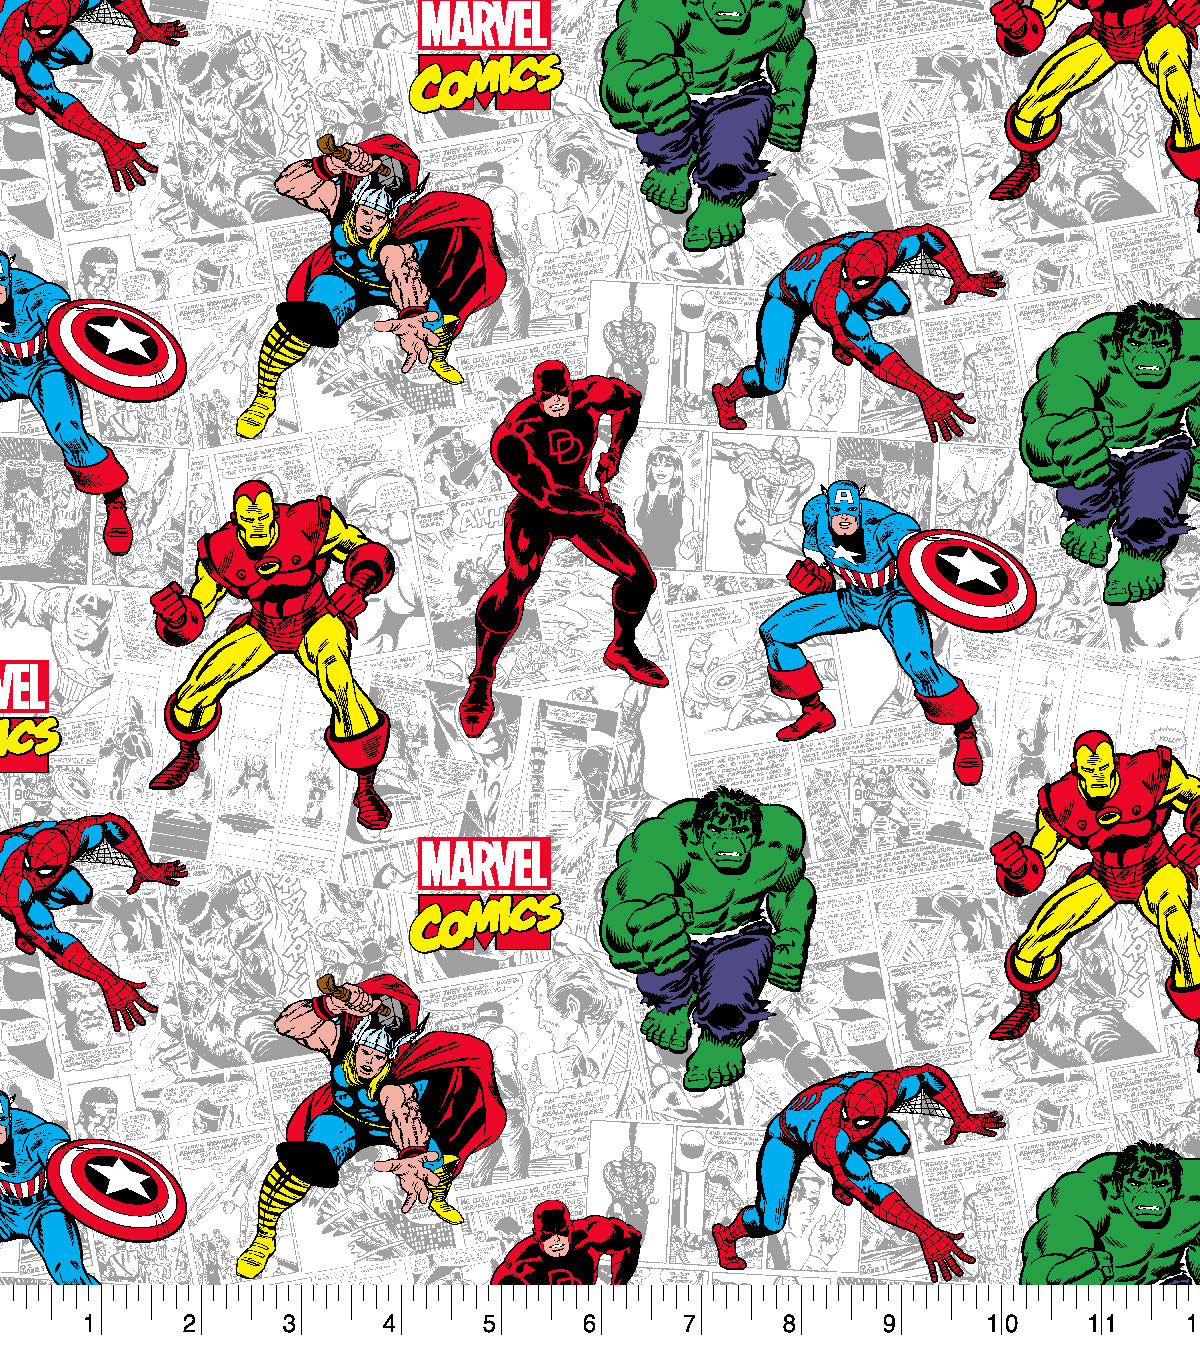 Marvel's Comic Book Action